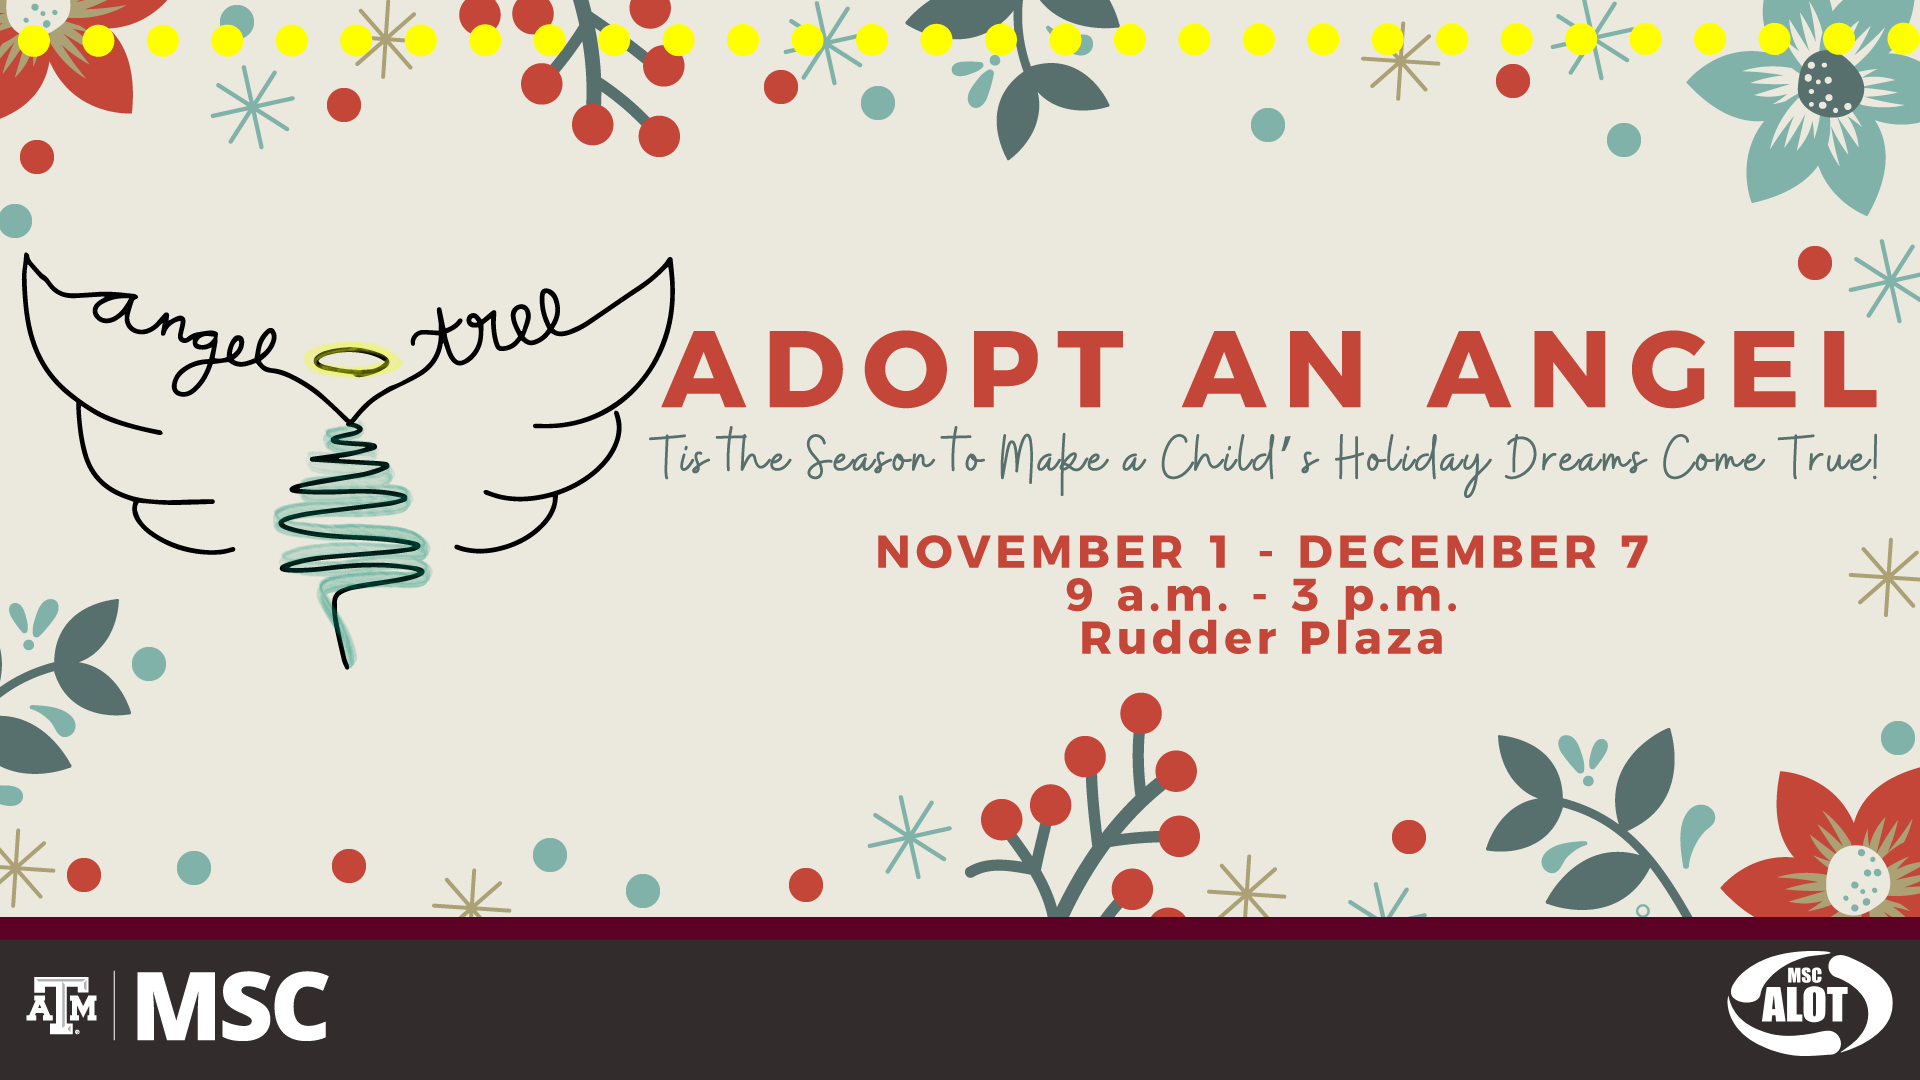 MSC ALOT presents: Angel Tree. Adopt an Angel. Tis the season to make a child's holiday dreams come true! Tabling: November 1 - December 7. from 9 a.m. to 3 p.m., Rudder Plaza